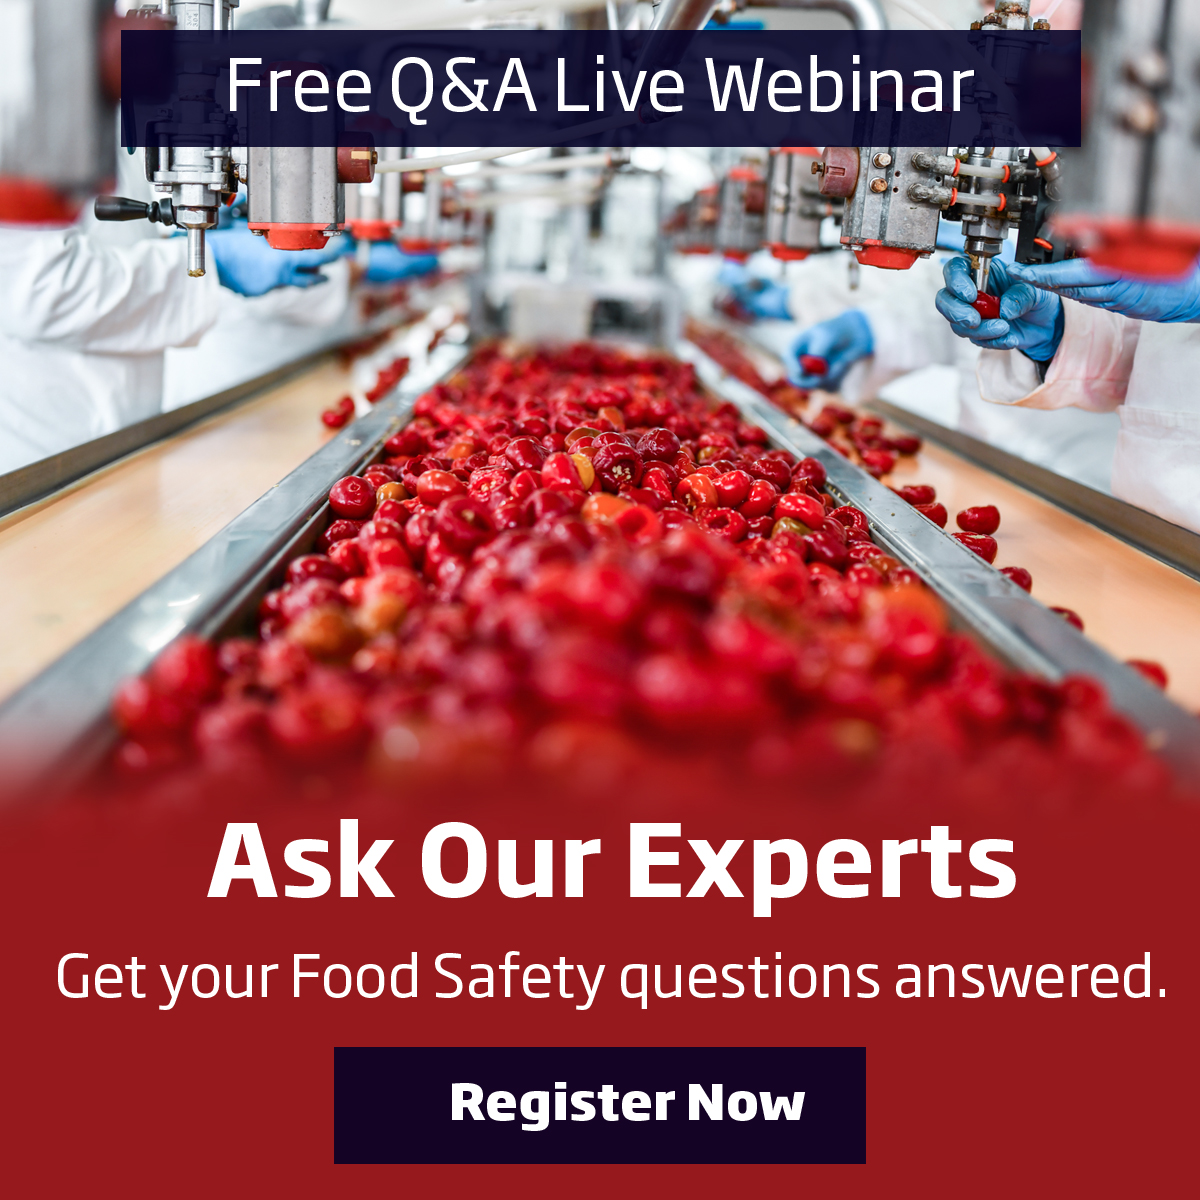 Post1-Food-Experts-Webinar-Q3-2022-1200by1200